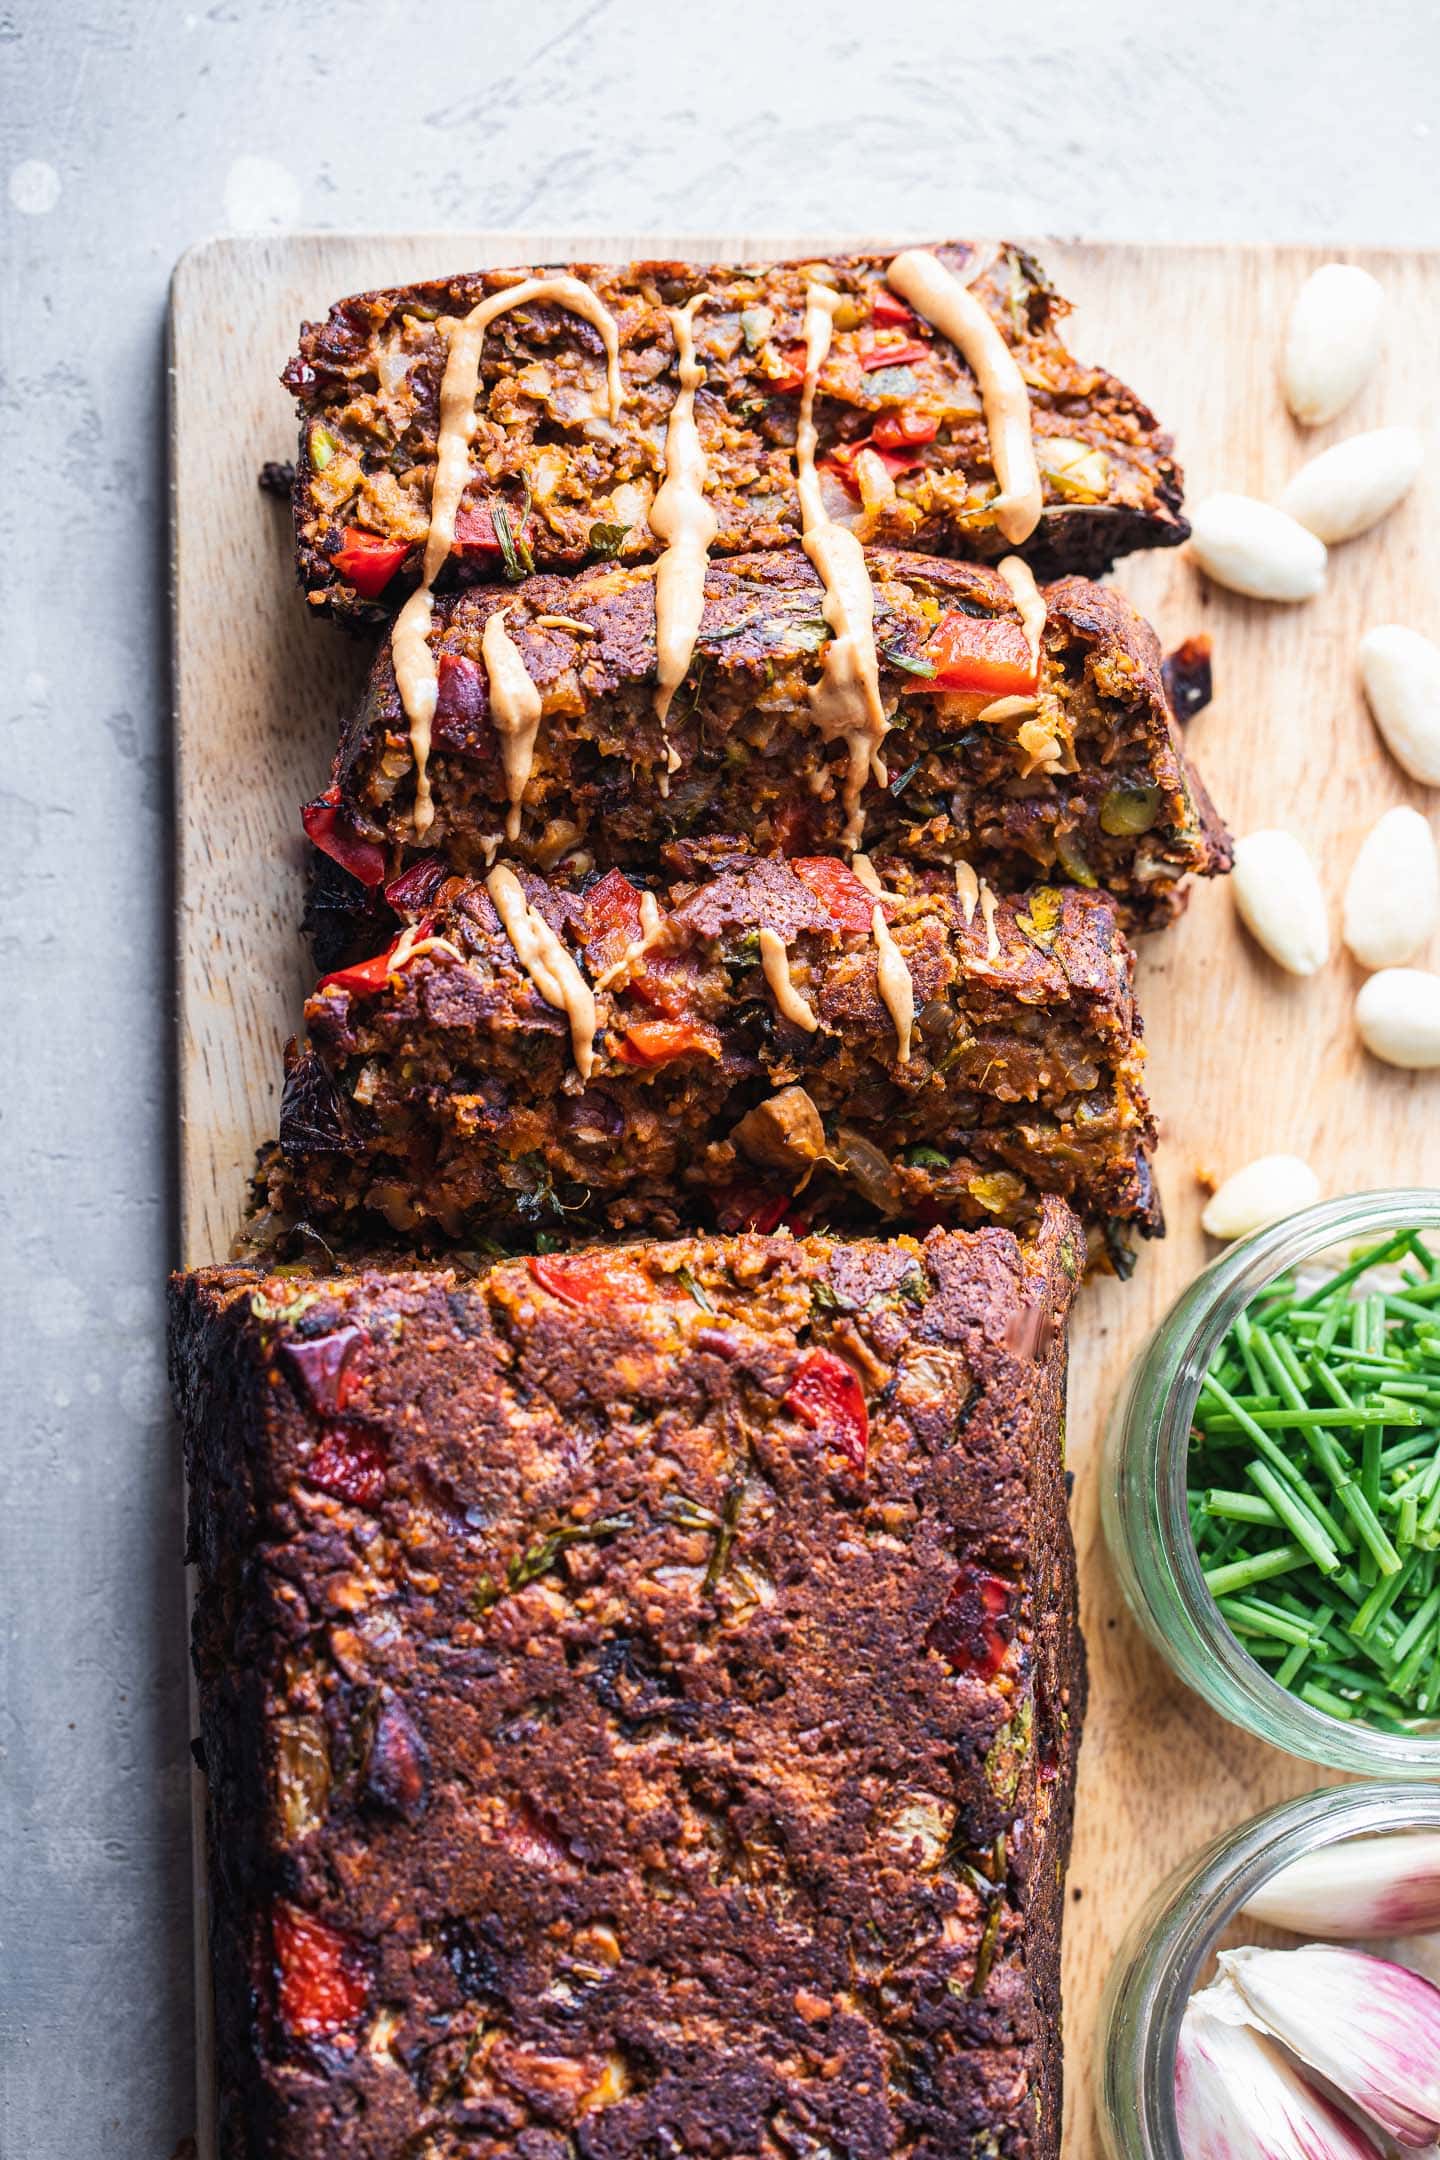 Vegan loaf with nuts and vegetables